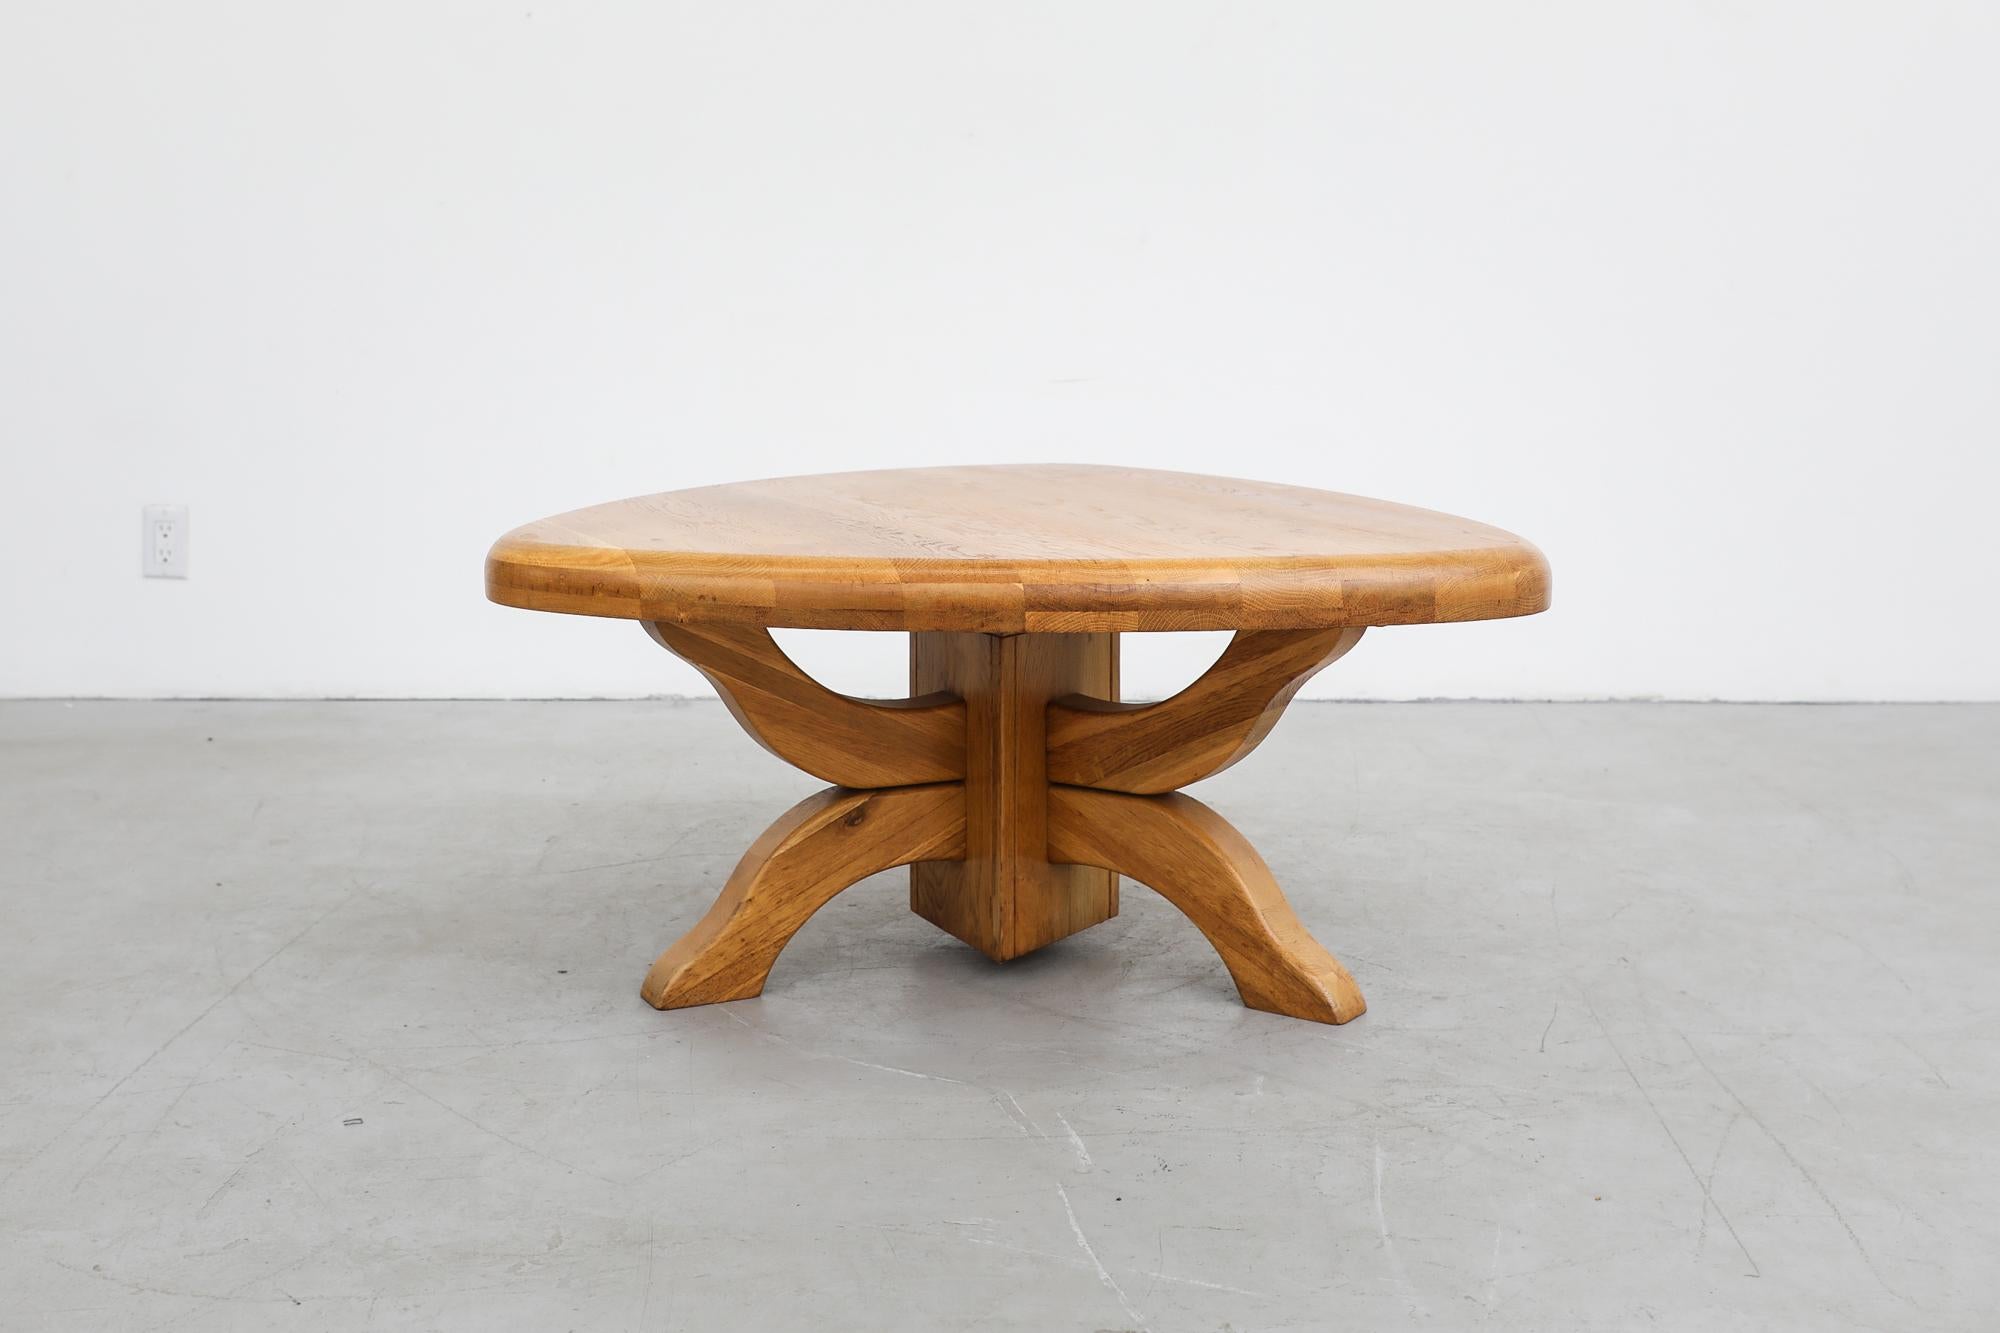 Dutch Pierre Chapo Inspired Brutalist Golden Oak Triangular Side Table with Thick Top